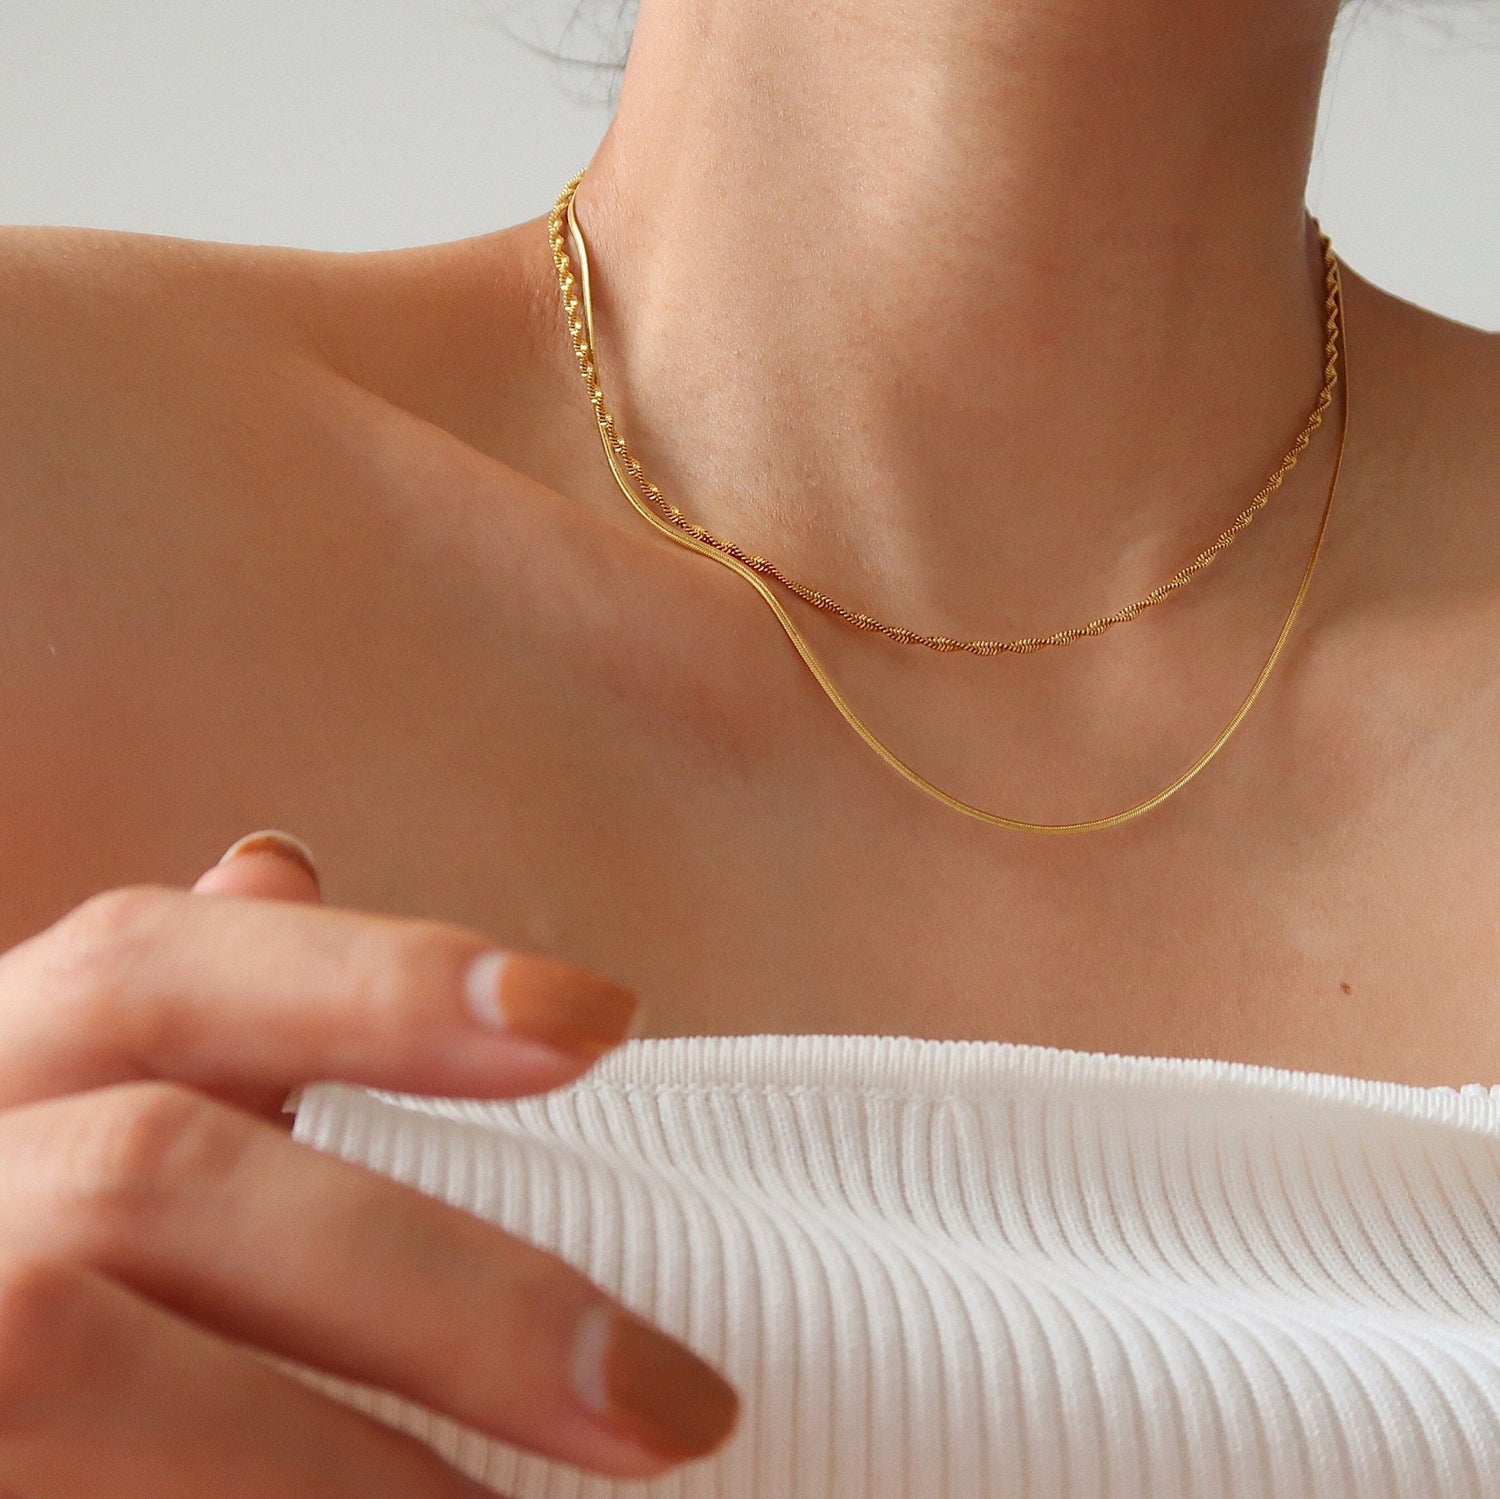 Slim version: Gold plated classic serpentine bone chain necklace - flat - 1.2mm wide